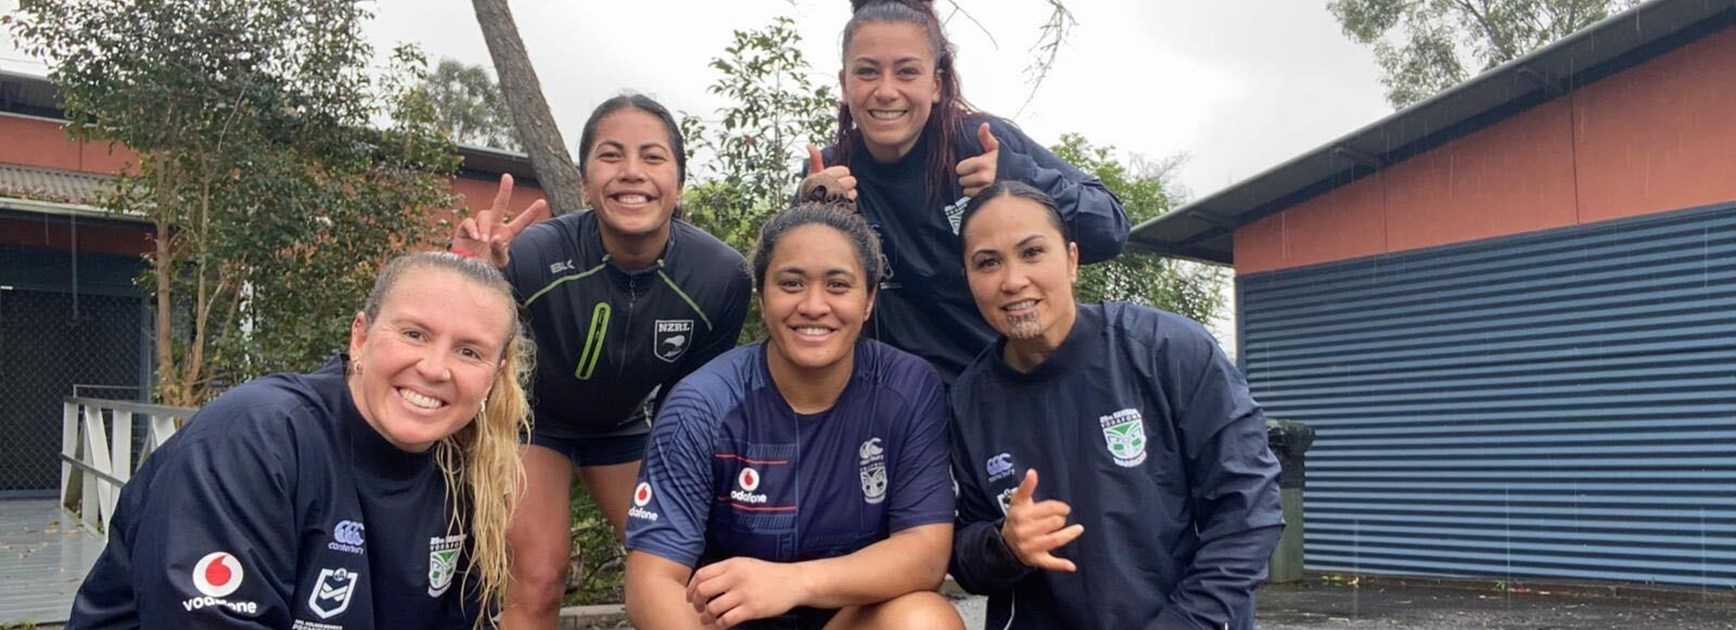 The historical island set to inspire fab five Warriors women